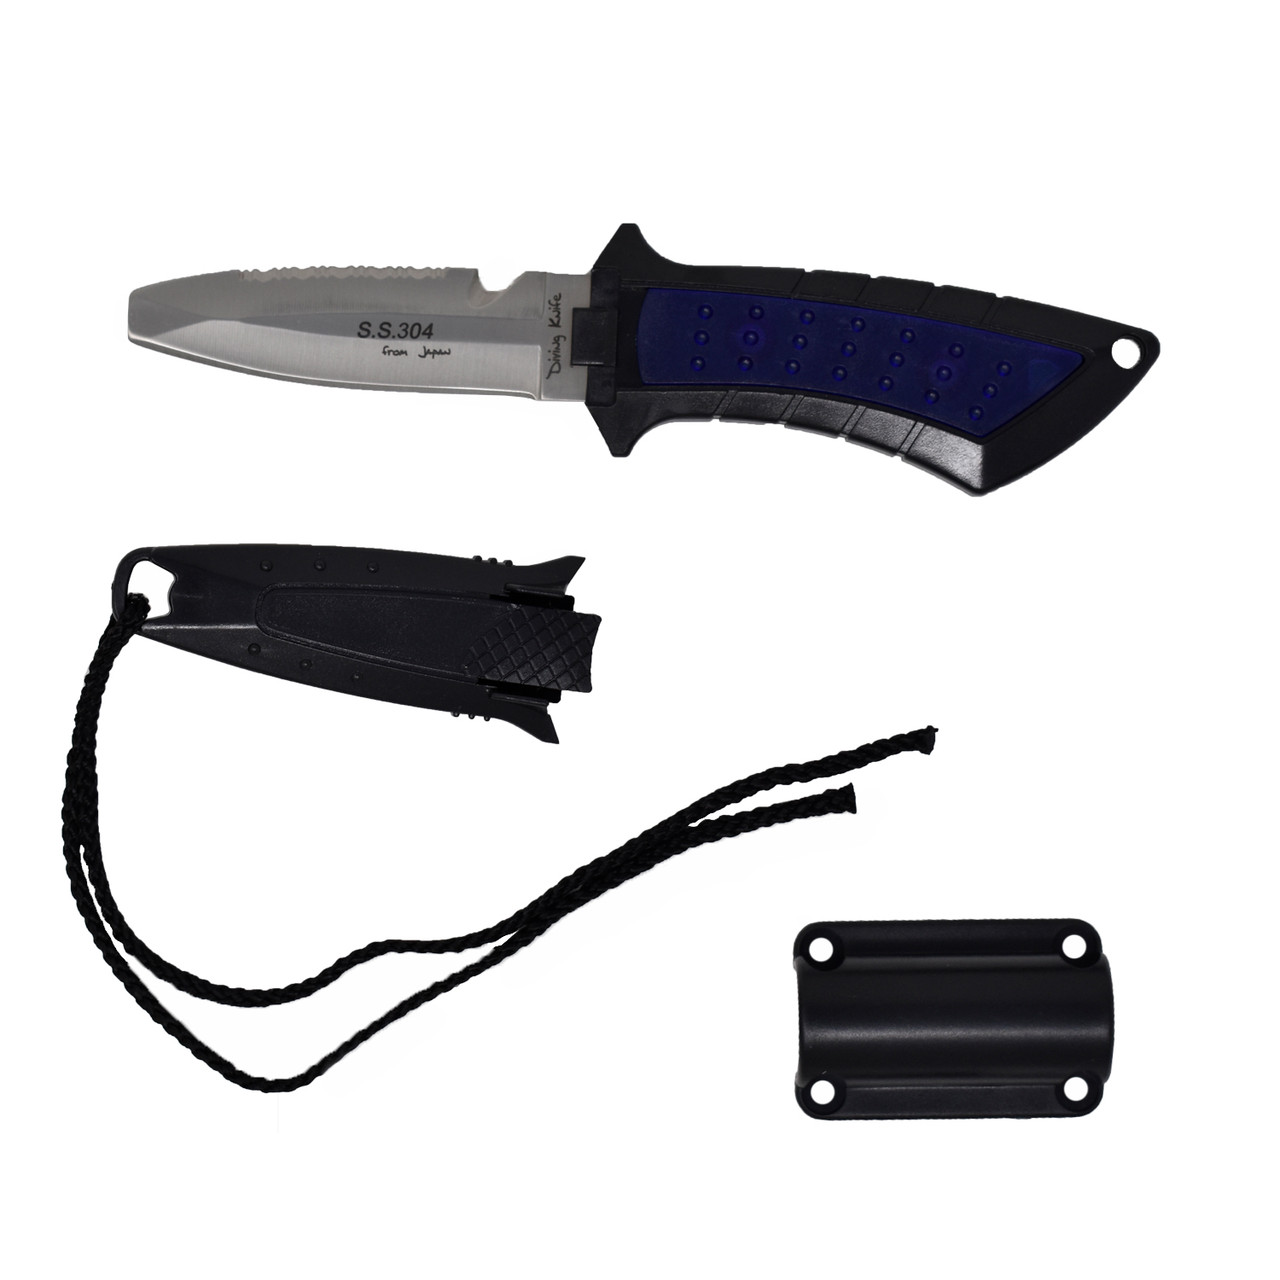 Scuba Diving Boating Low Volume Stainless Steel Blunt Tip BCD Knife -  scubachoice